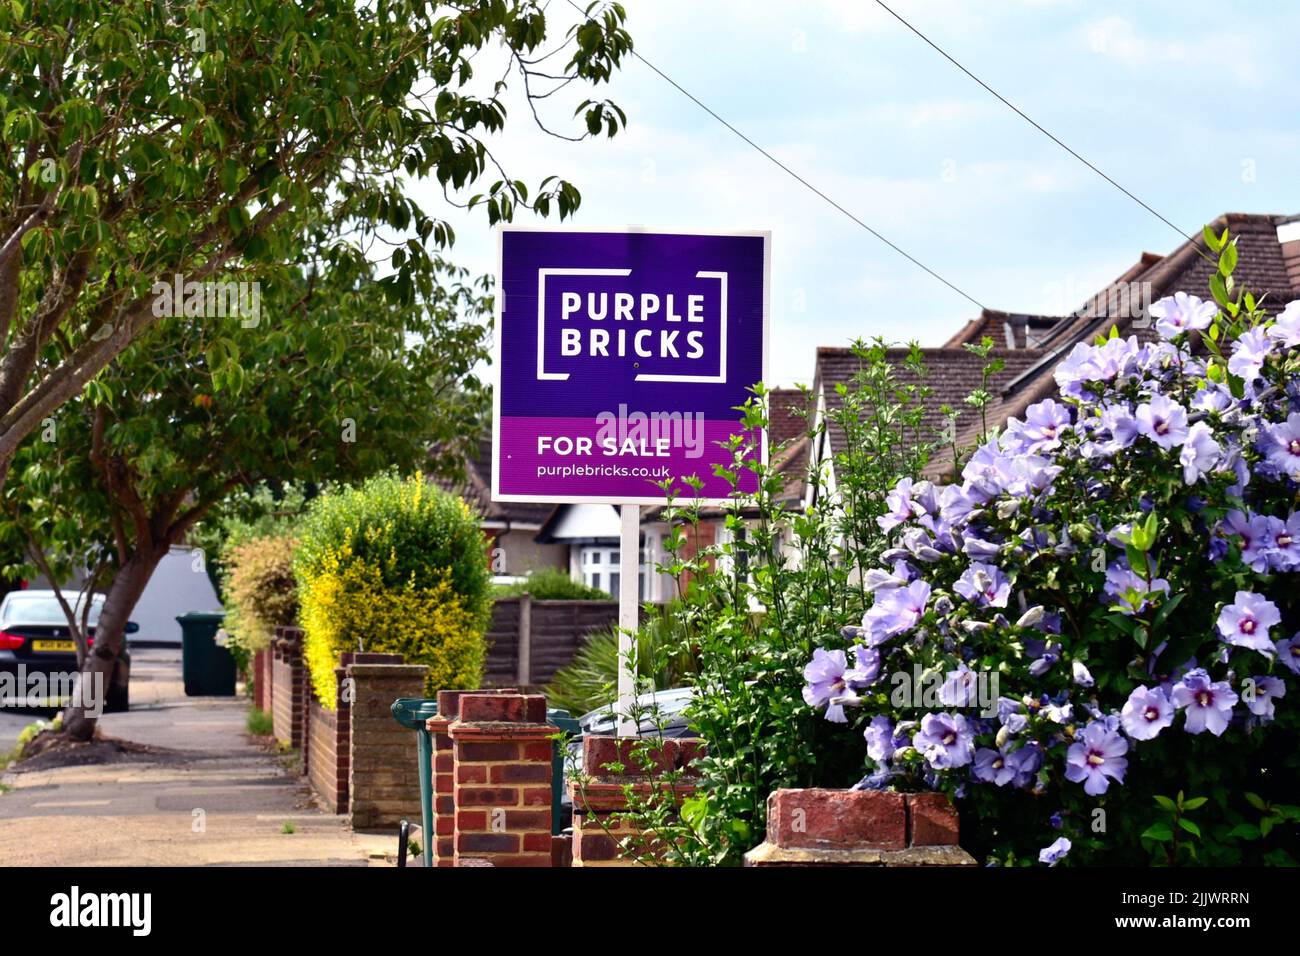 A 'Purple Bricks' online estate agents for sale sign outside a suburban  house in Shepperton Surrey UK Stock Photo